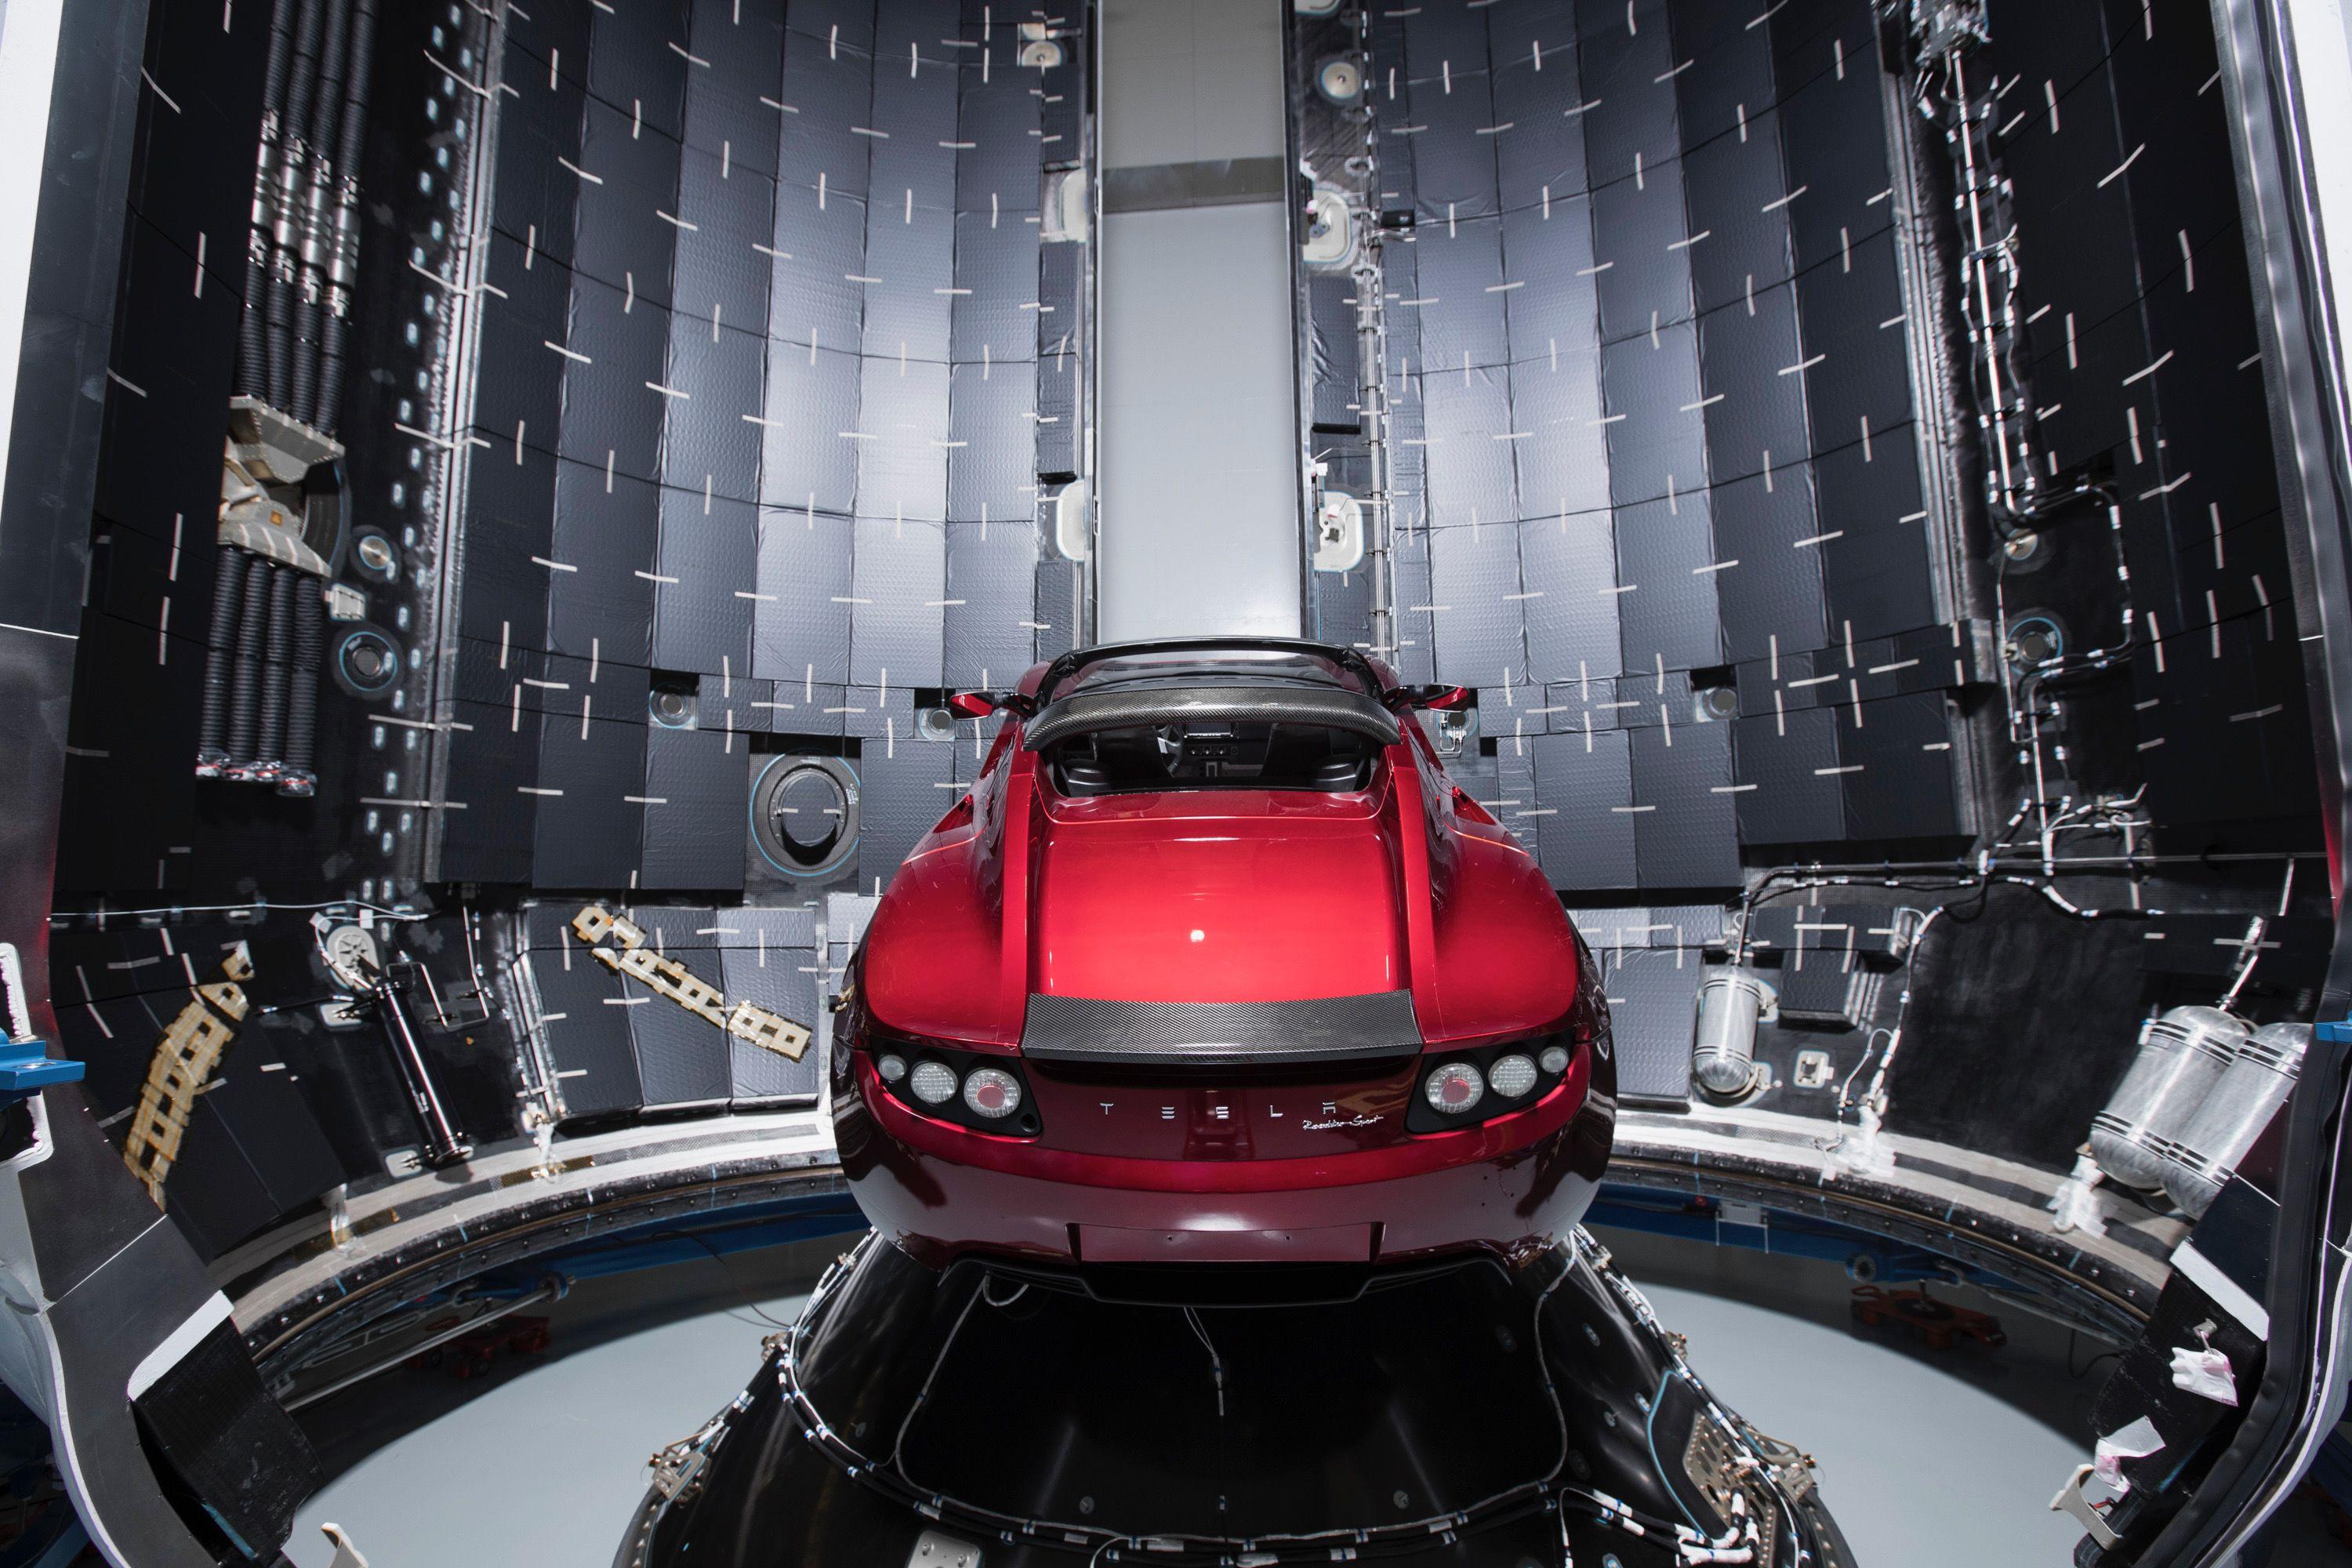 Space X Tesla Roadster Waiting For Space, HD Cars, 4k Wallpaper